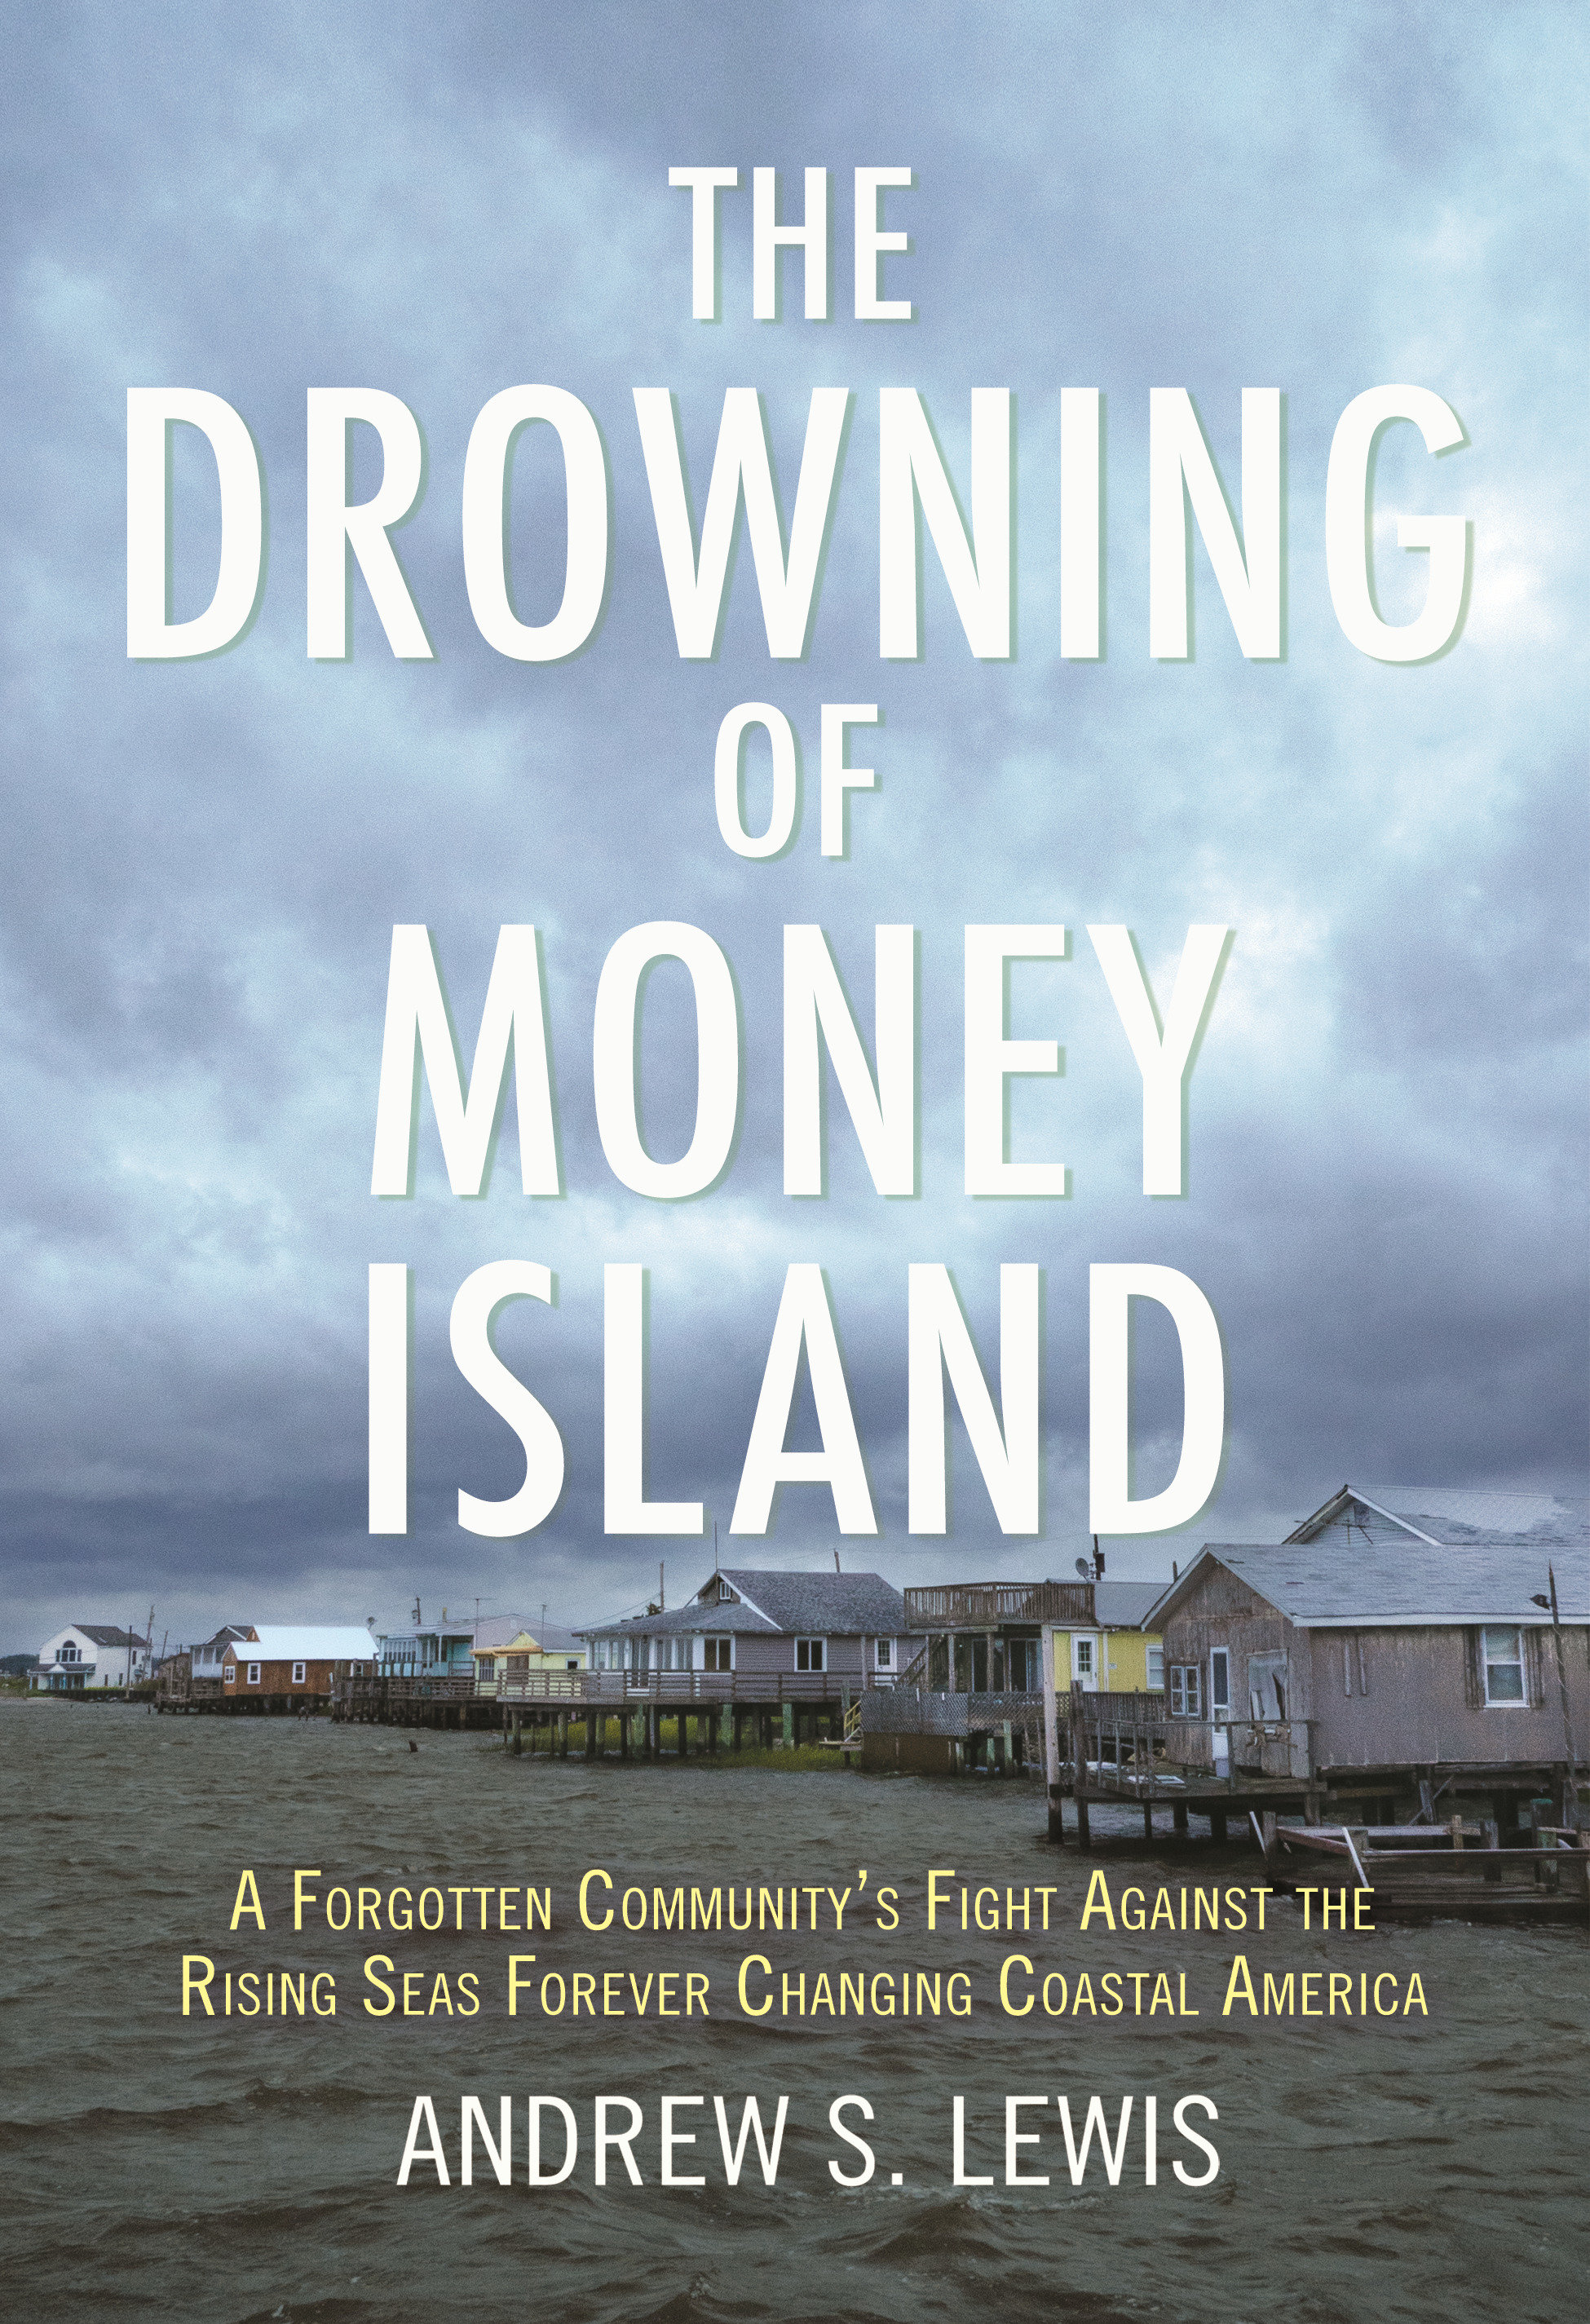 The Drowning Of Money Island (Hardcover Book)